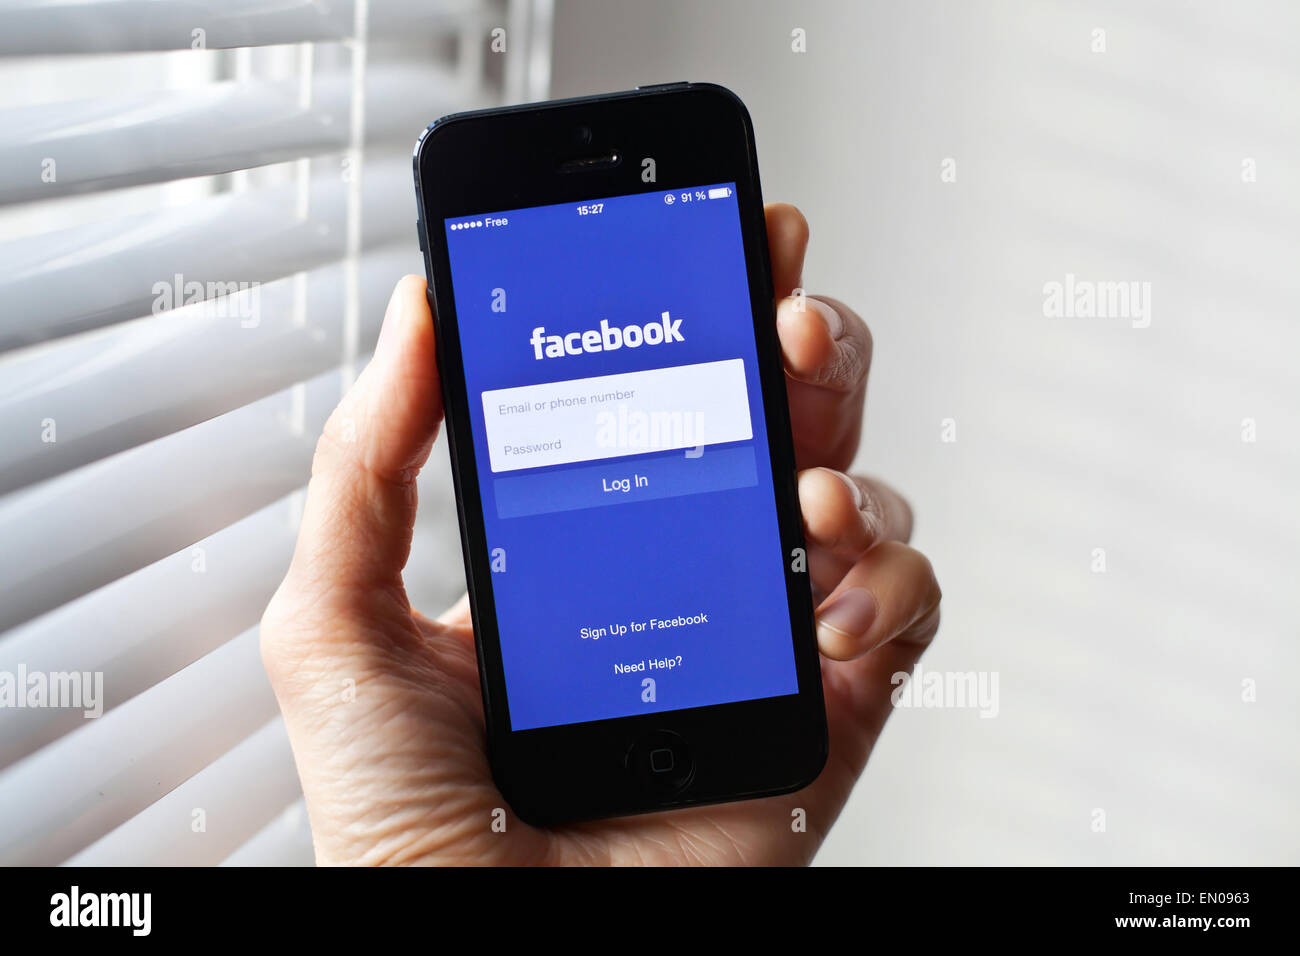 Hand holding Iphone with mobile application for Facebook on the screen Stock Photo